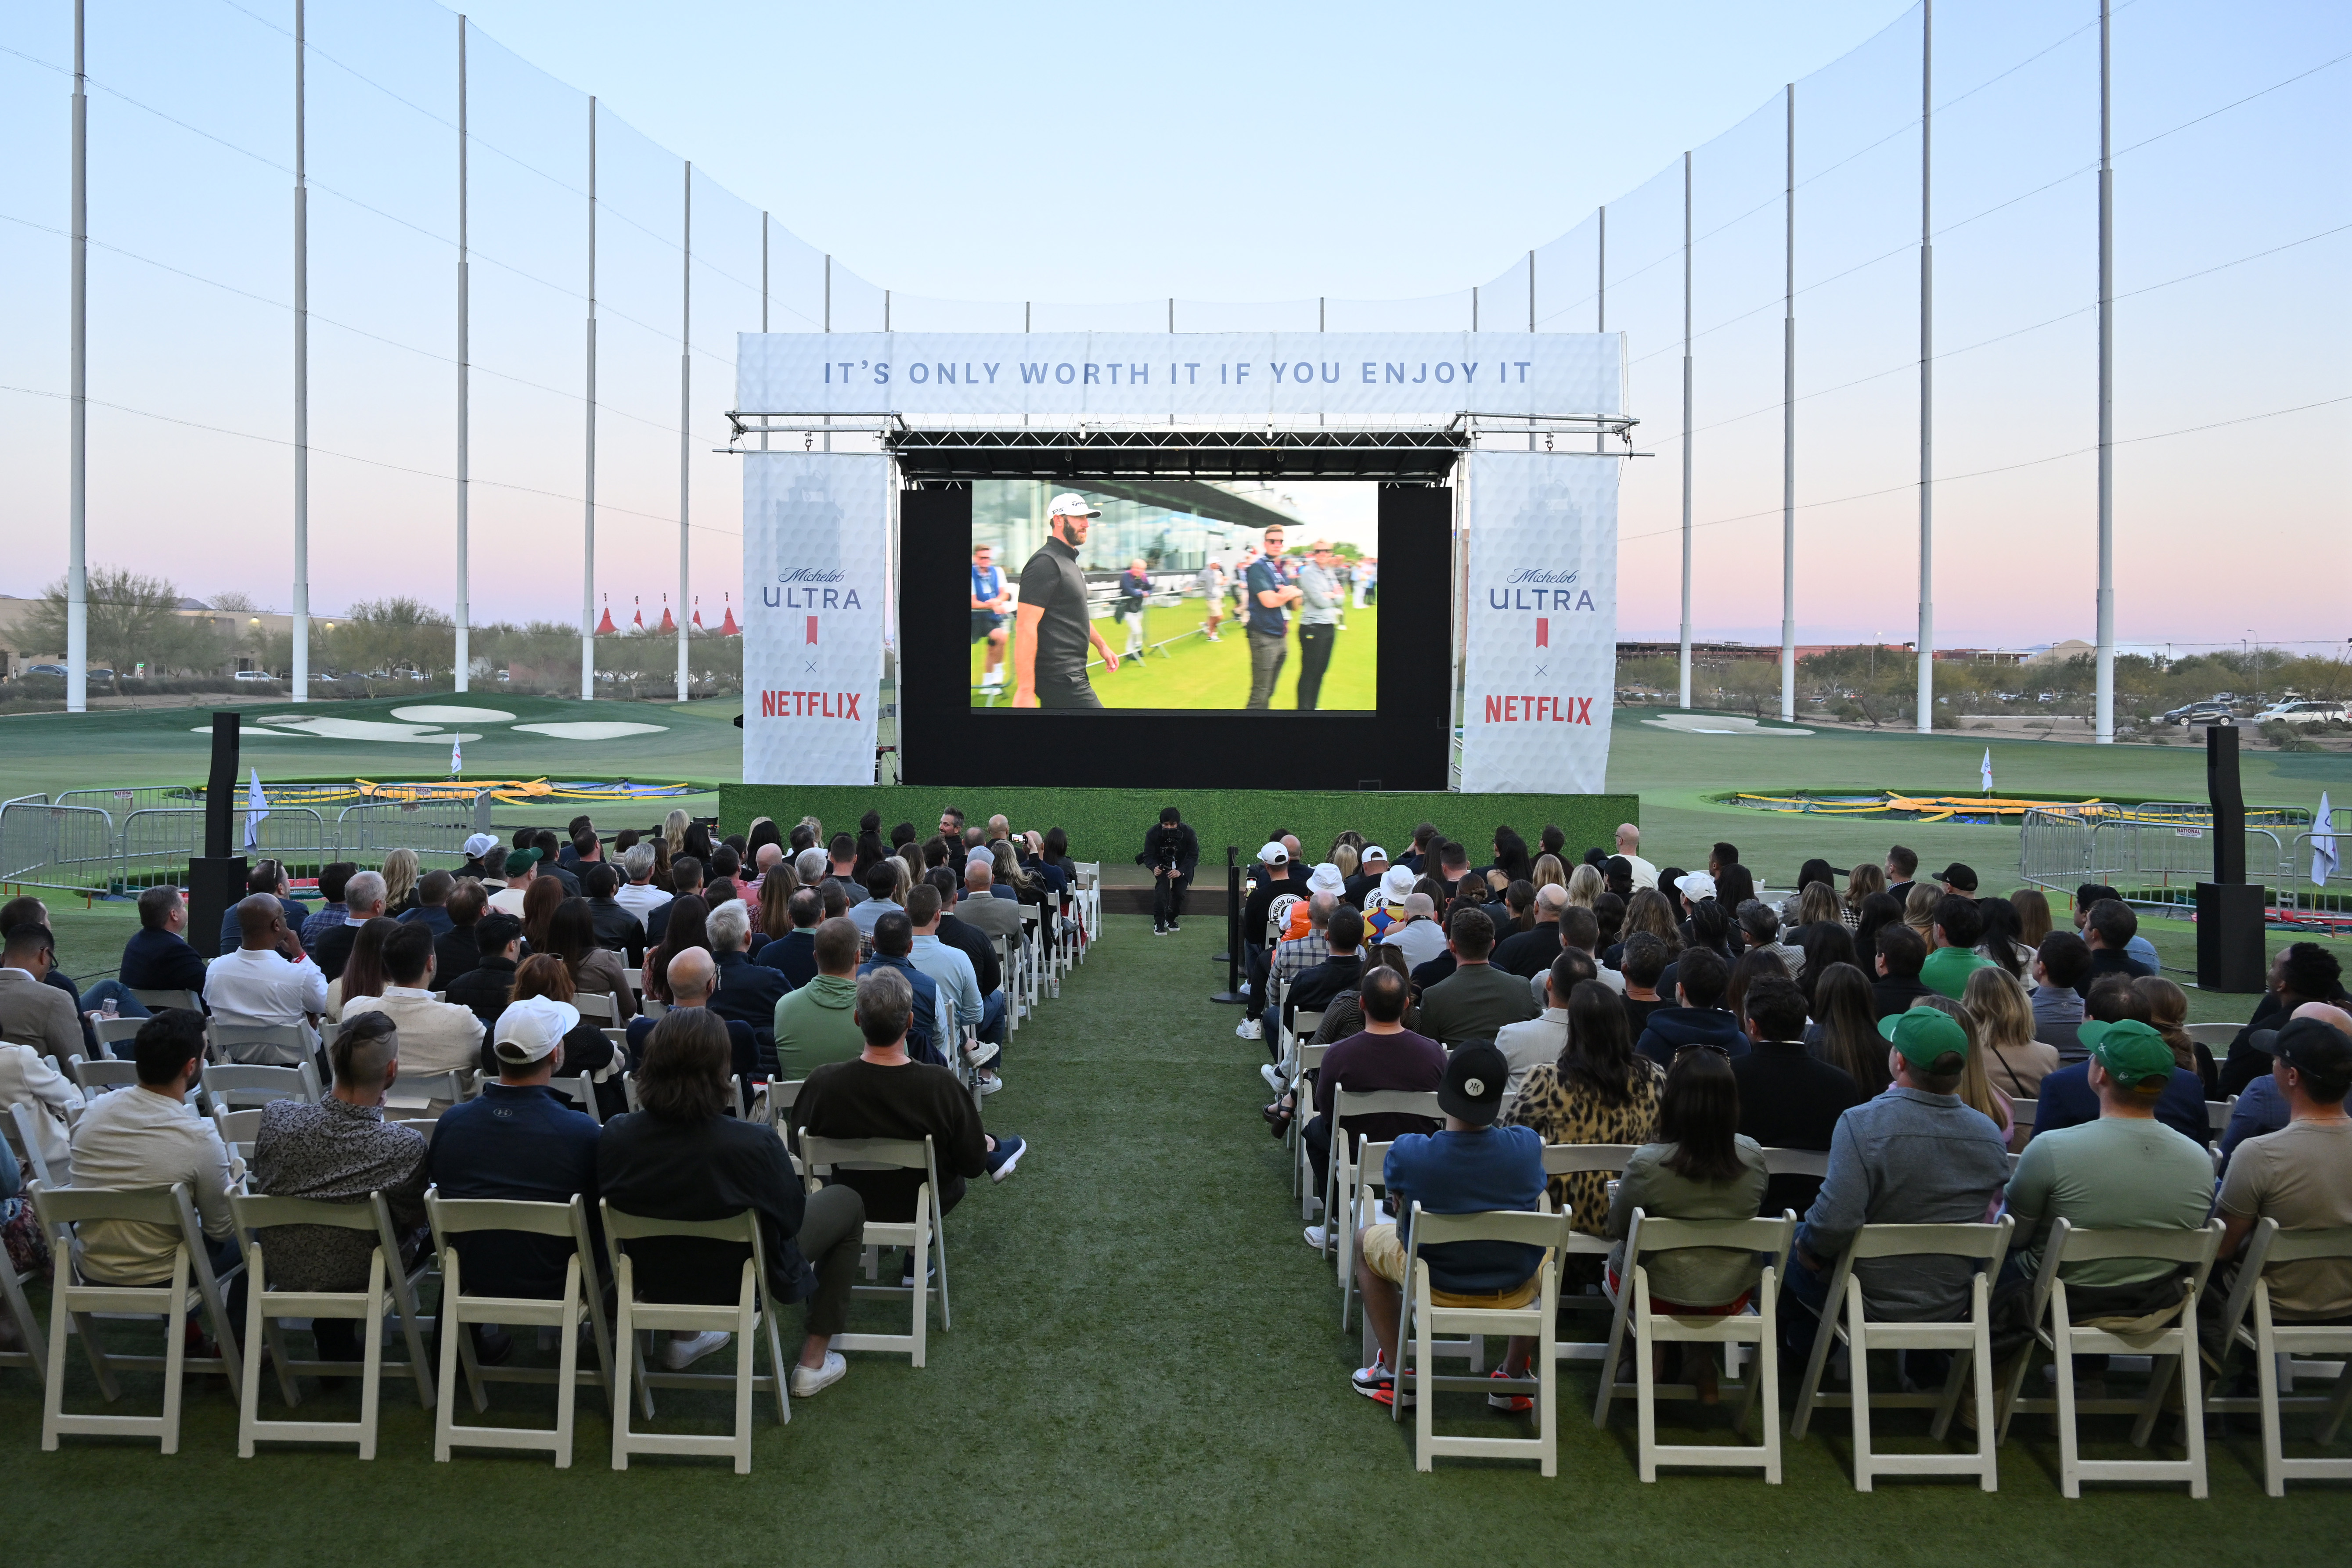 Golf Digest on X: A PGA Tour docu-series is coming to Netflix. 👀 The  streaming giant confirmed a new show chronicling the lives of some of  golf's biggest names. More details and